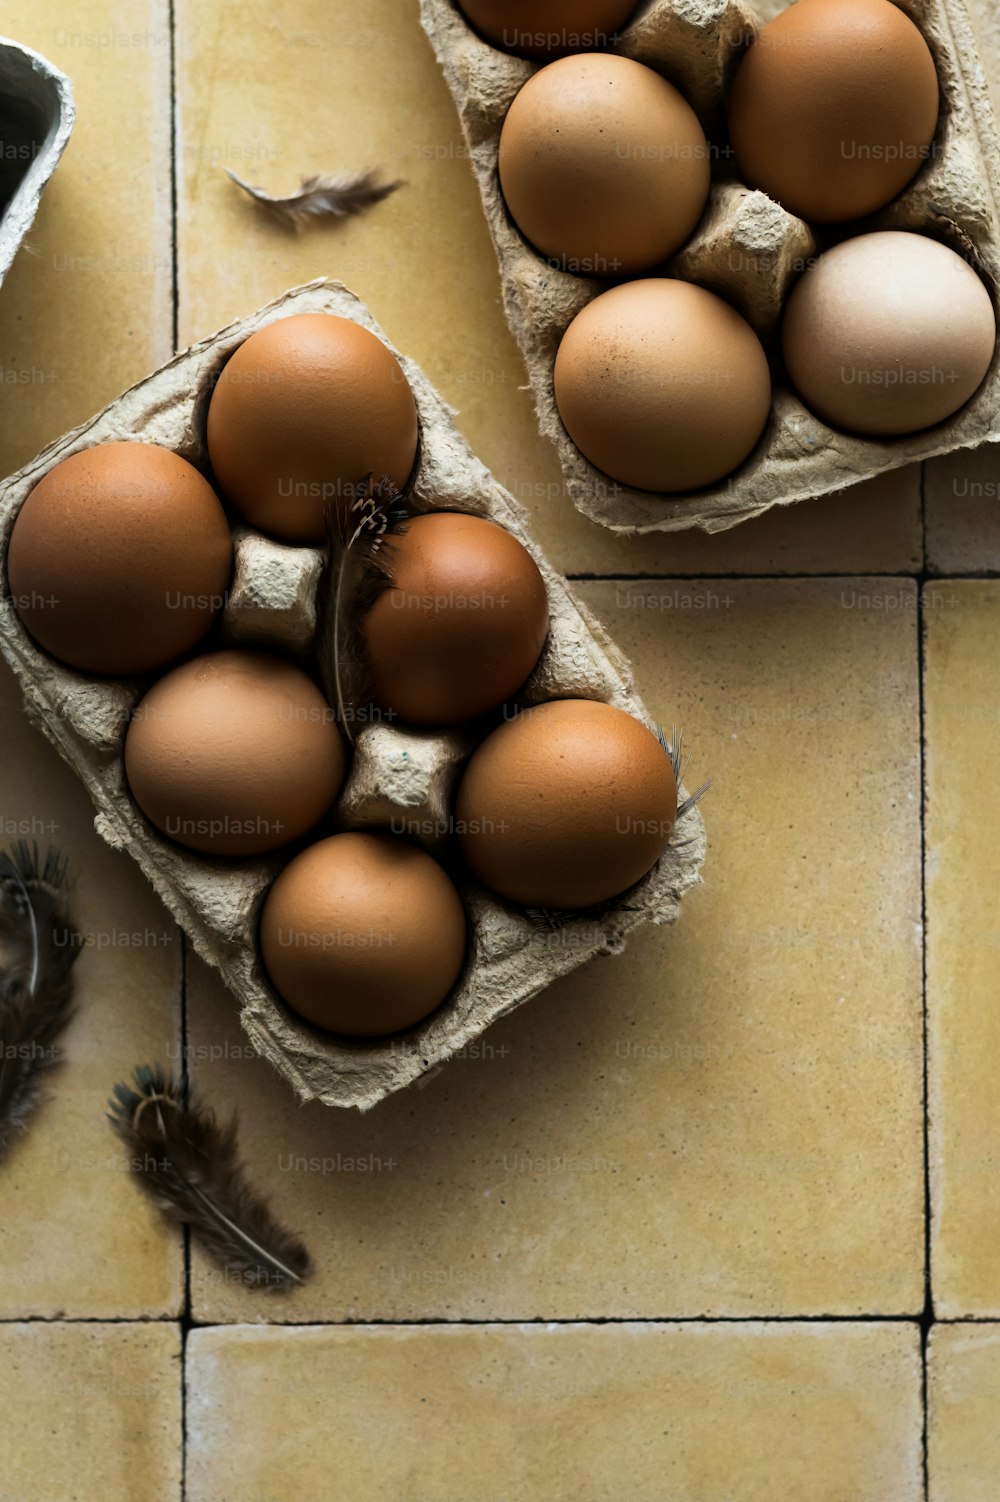 a couple of eggs sitting on top of a tiled floor